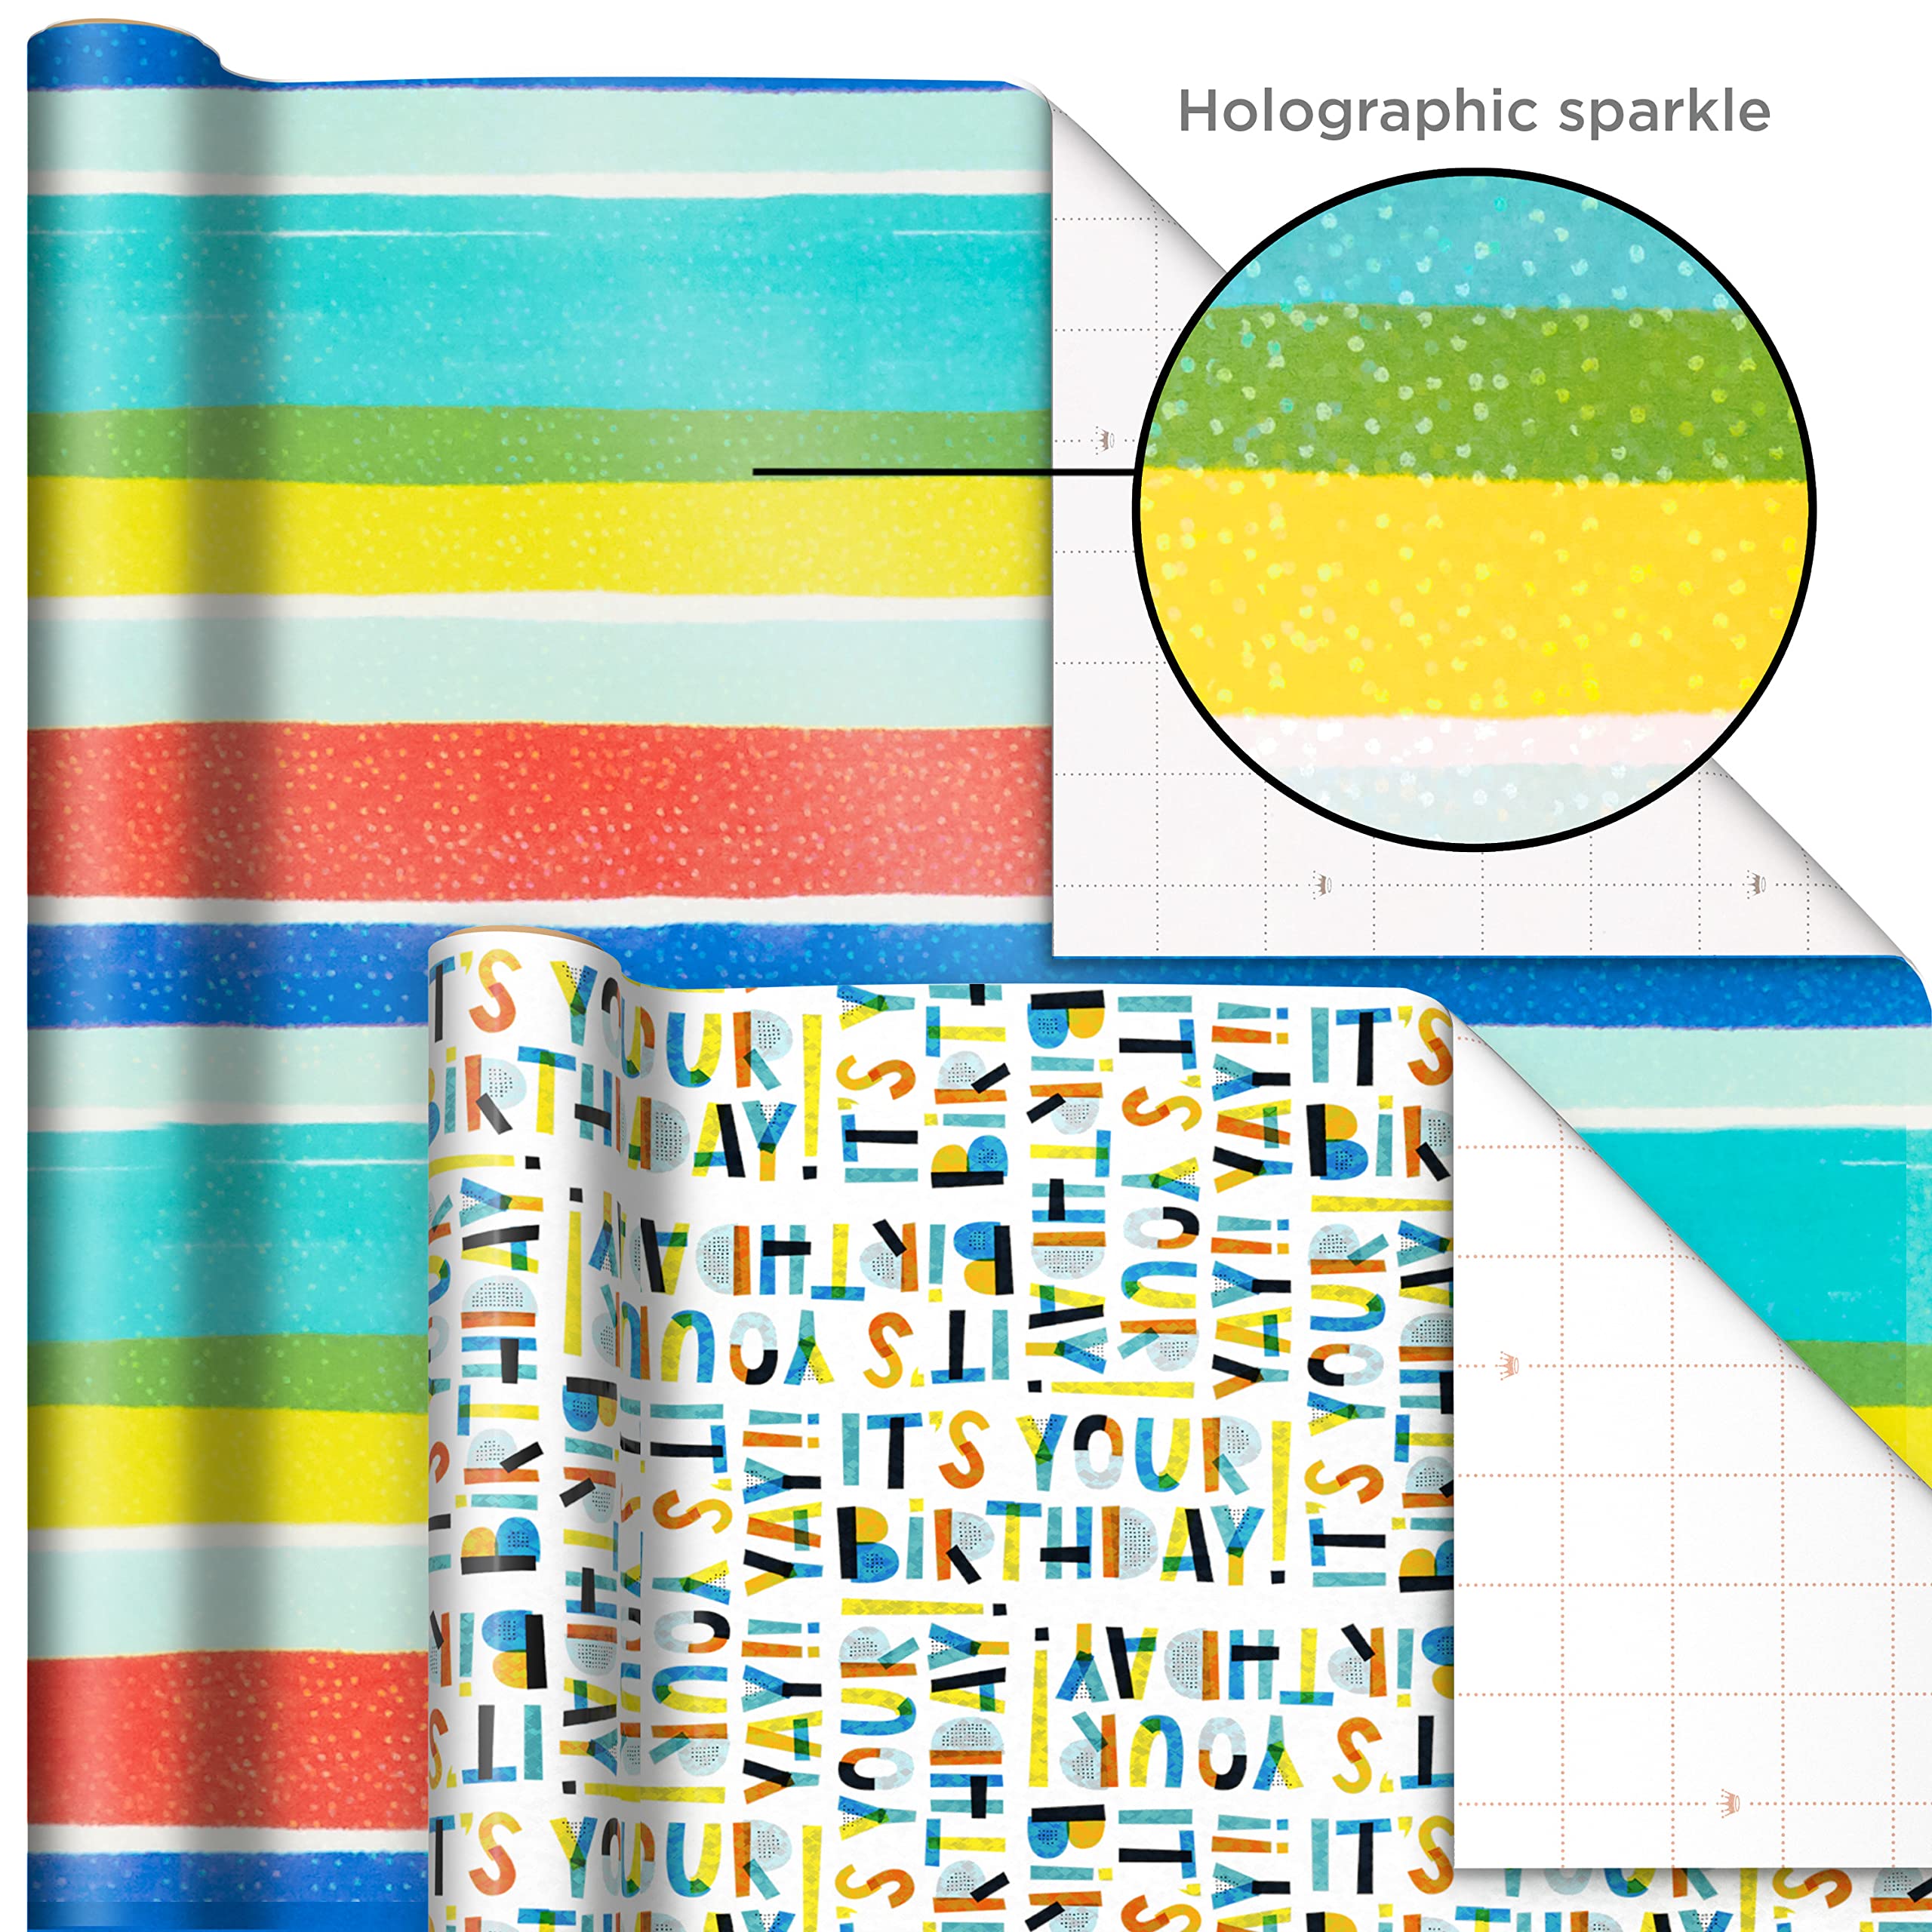 Hallmark Colorful Wrapping Paper Bundle with Cutlines on Reverse (6 Rolls: 110 Square Feet Total) Llamas, Zebras, Cupcakes, Holographic Stripes, Polka Dots for Birthdays, Kids Parties, Back to School